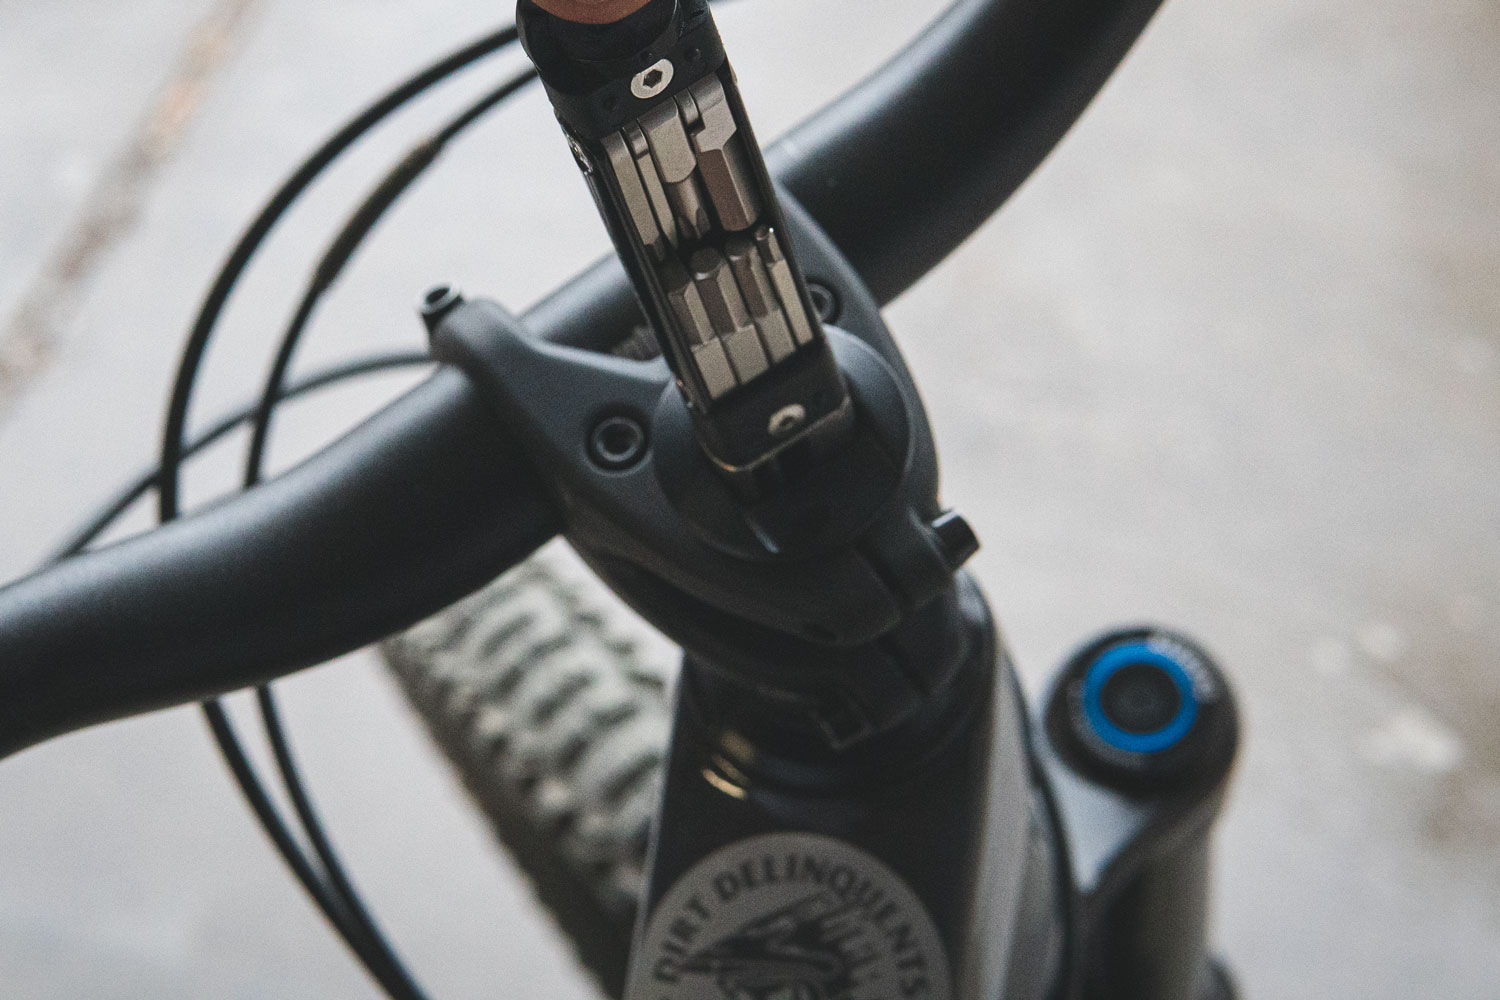 Bontrager BITS Integrated Tool Review